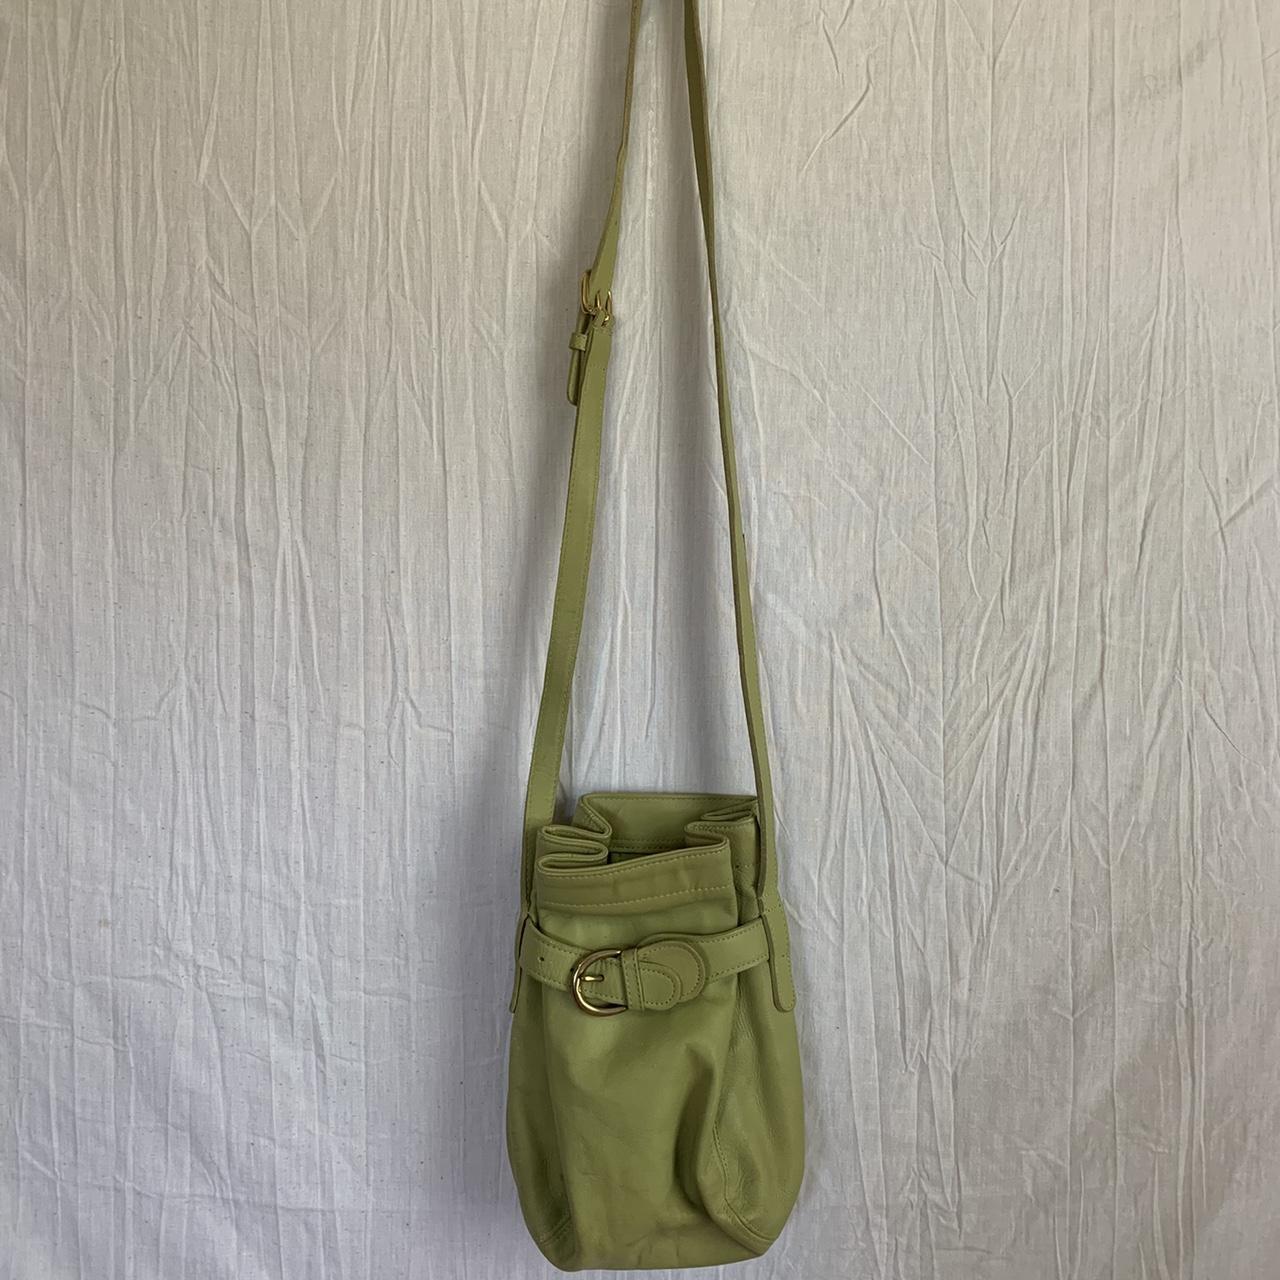 Coach, Bags, Vintage Lime Green Coach Tote